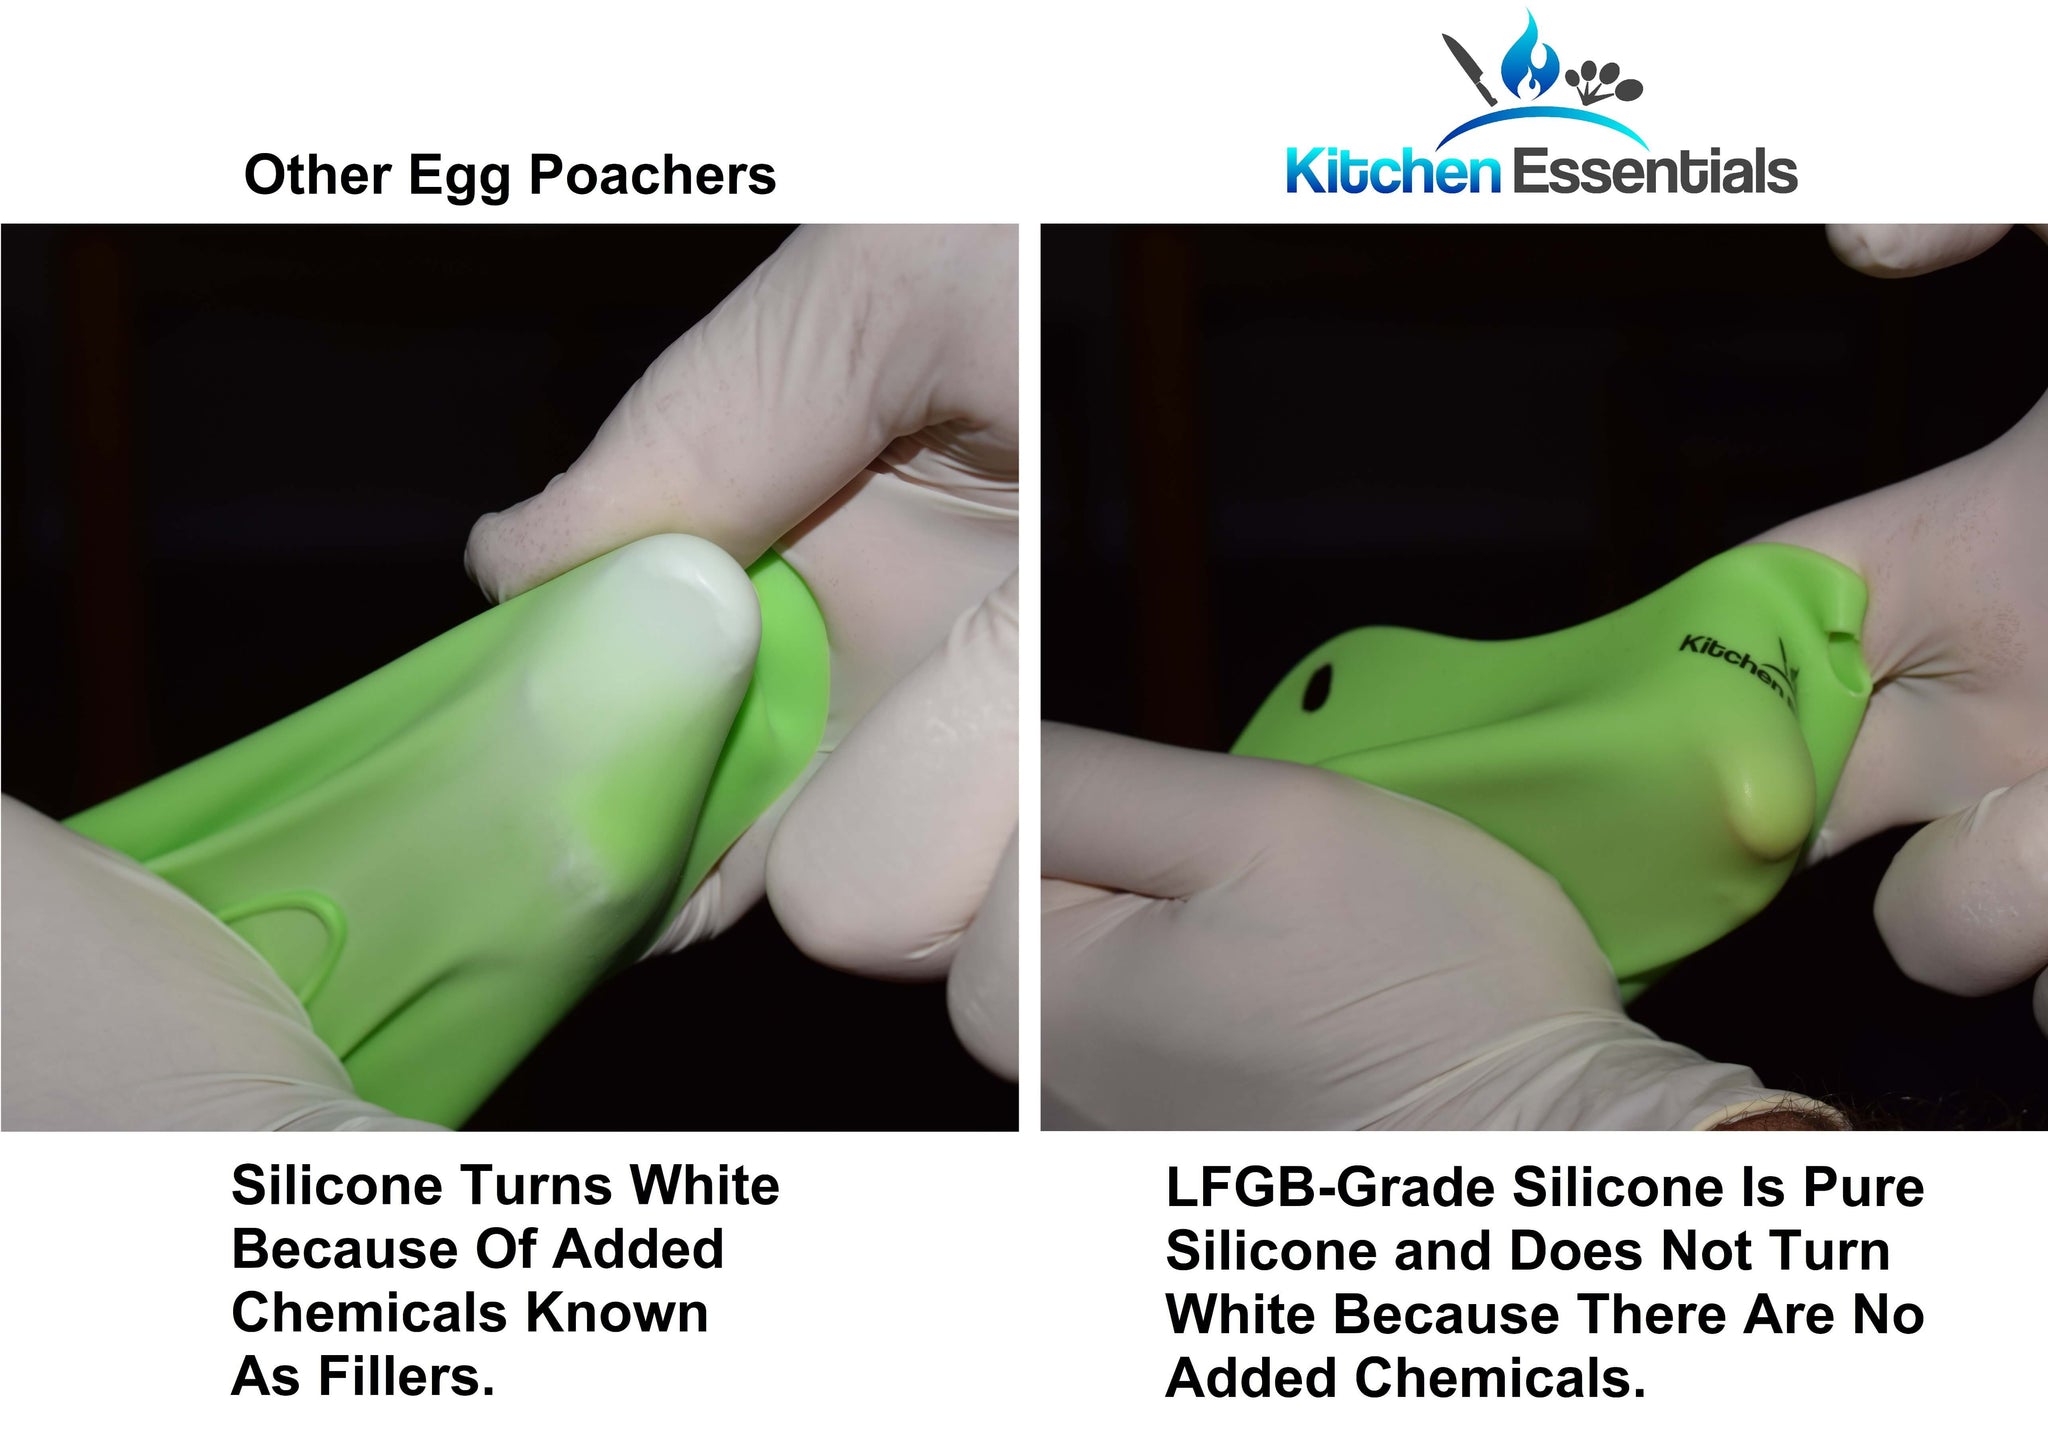 Silicone Egg Poaching Cups Easy Release and Cleaning, Poached Egg